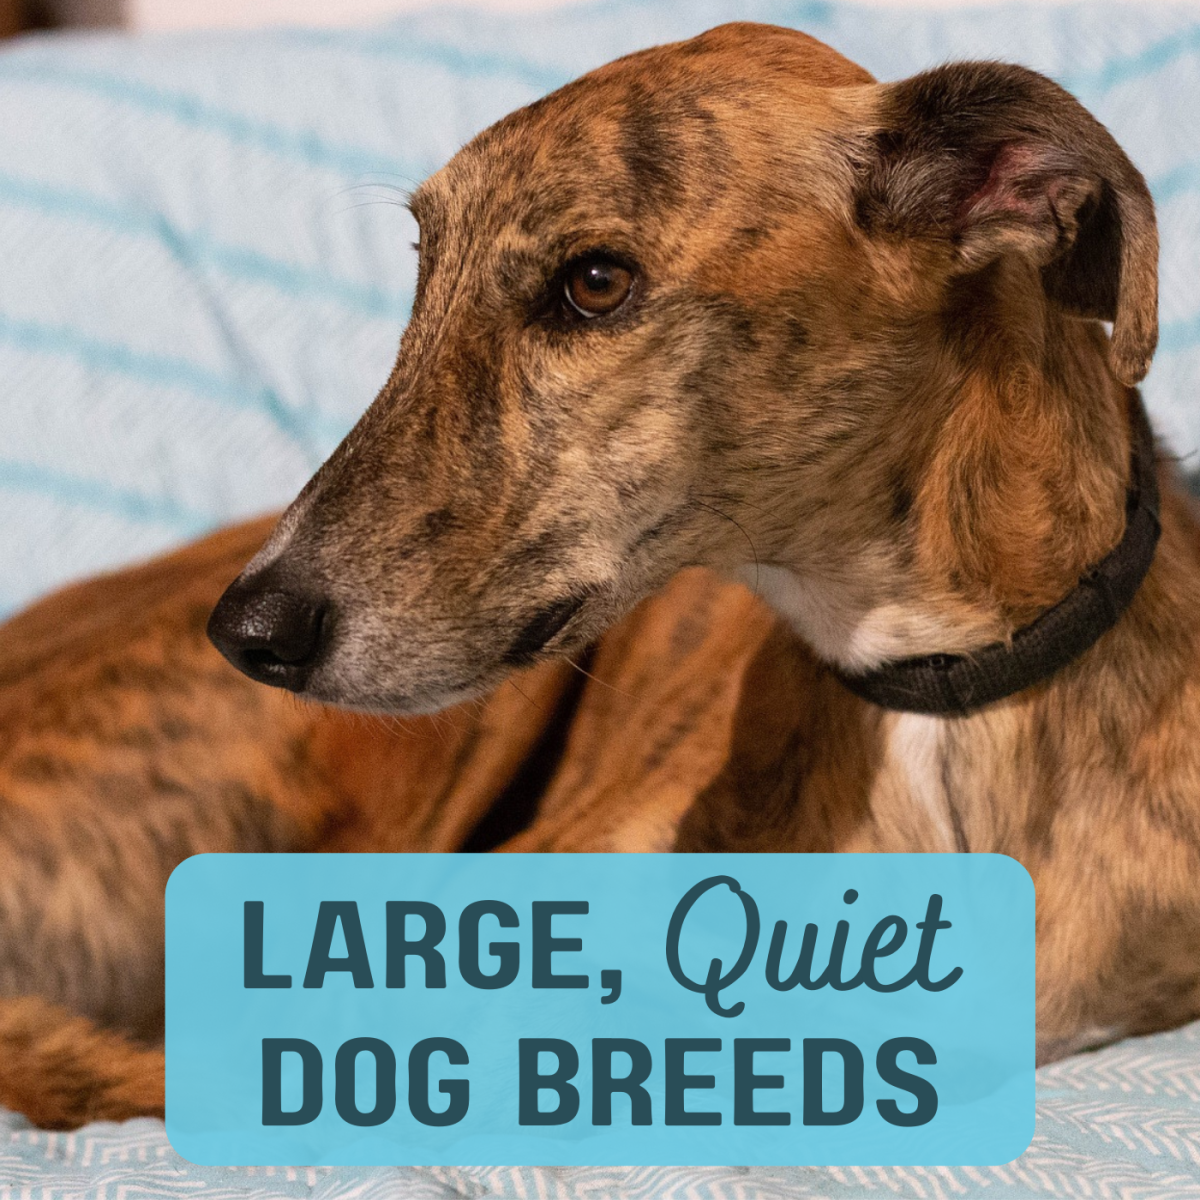 Are you looking for a big dog that doesn't bark much? Try one of these recommended breeds, like the Greyhound.